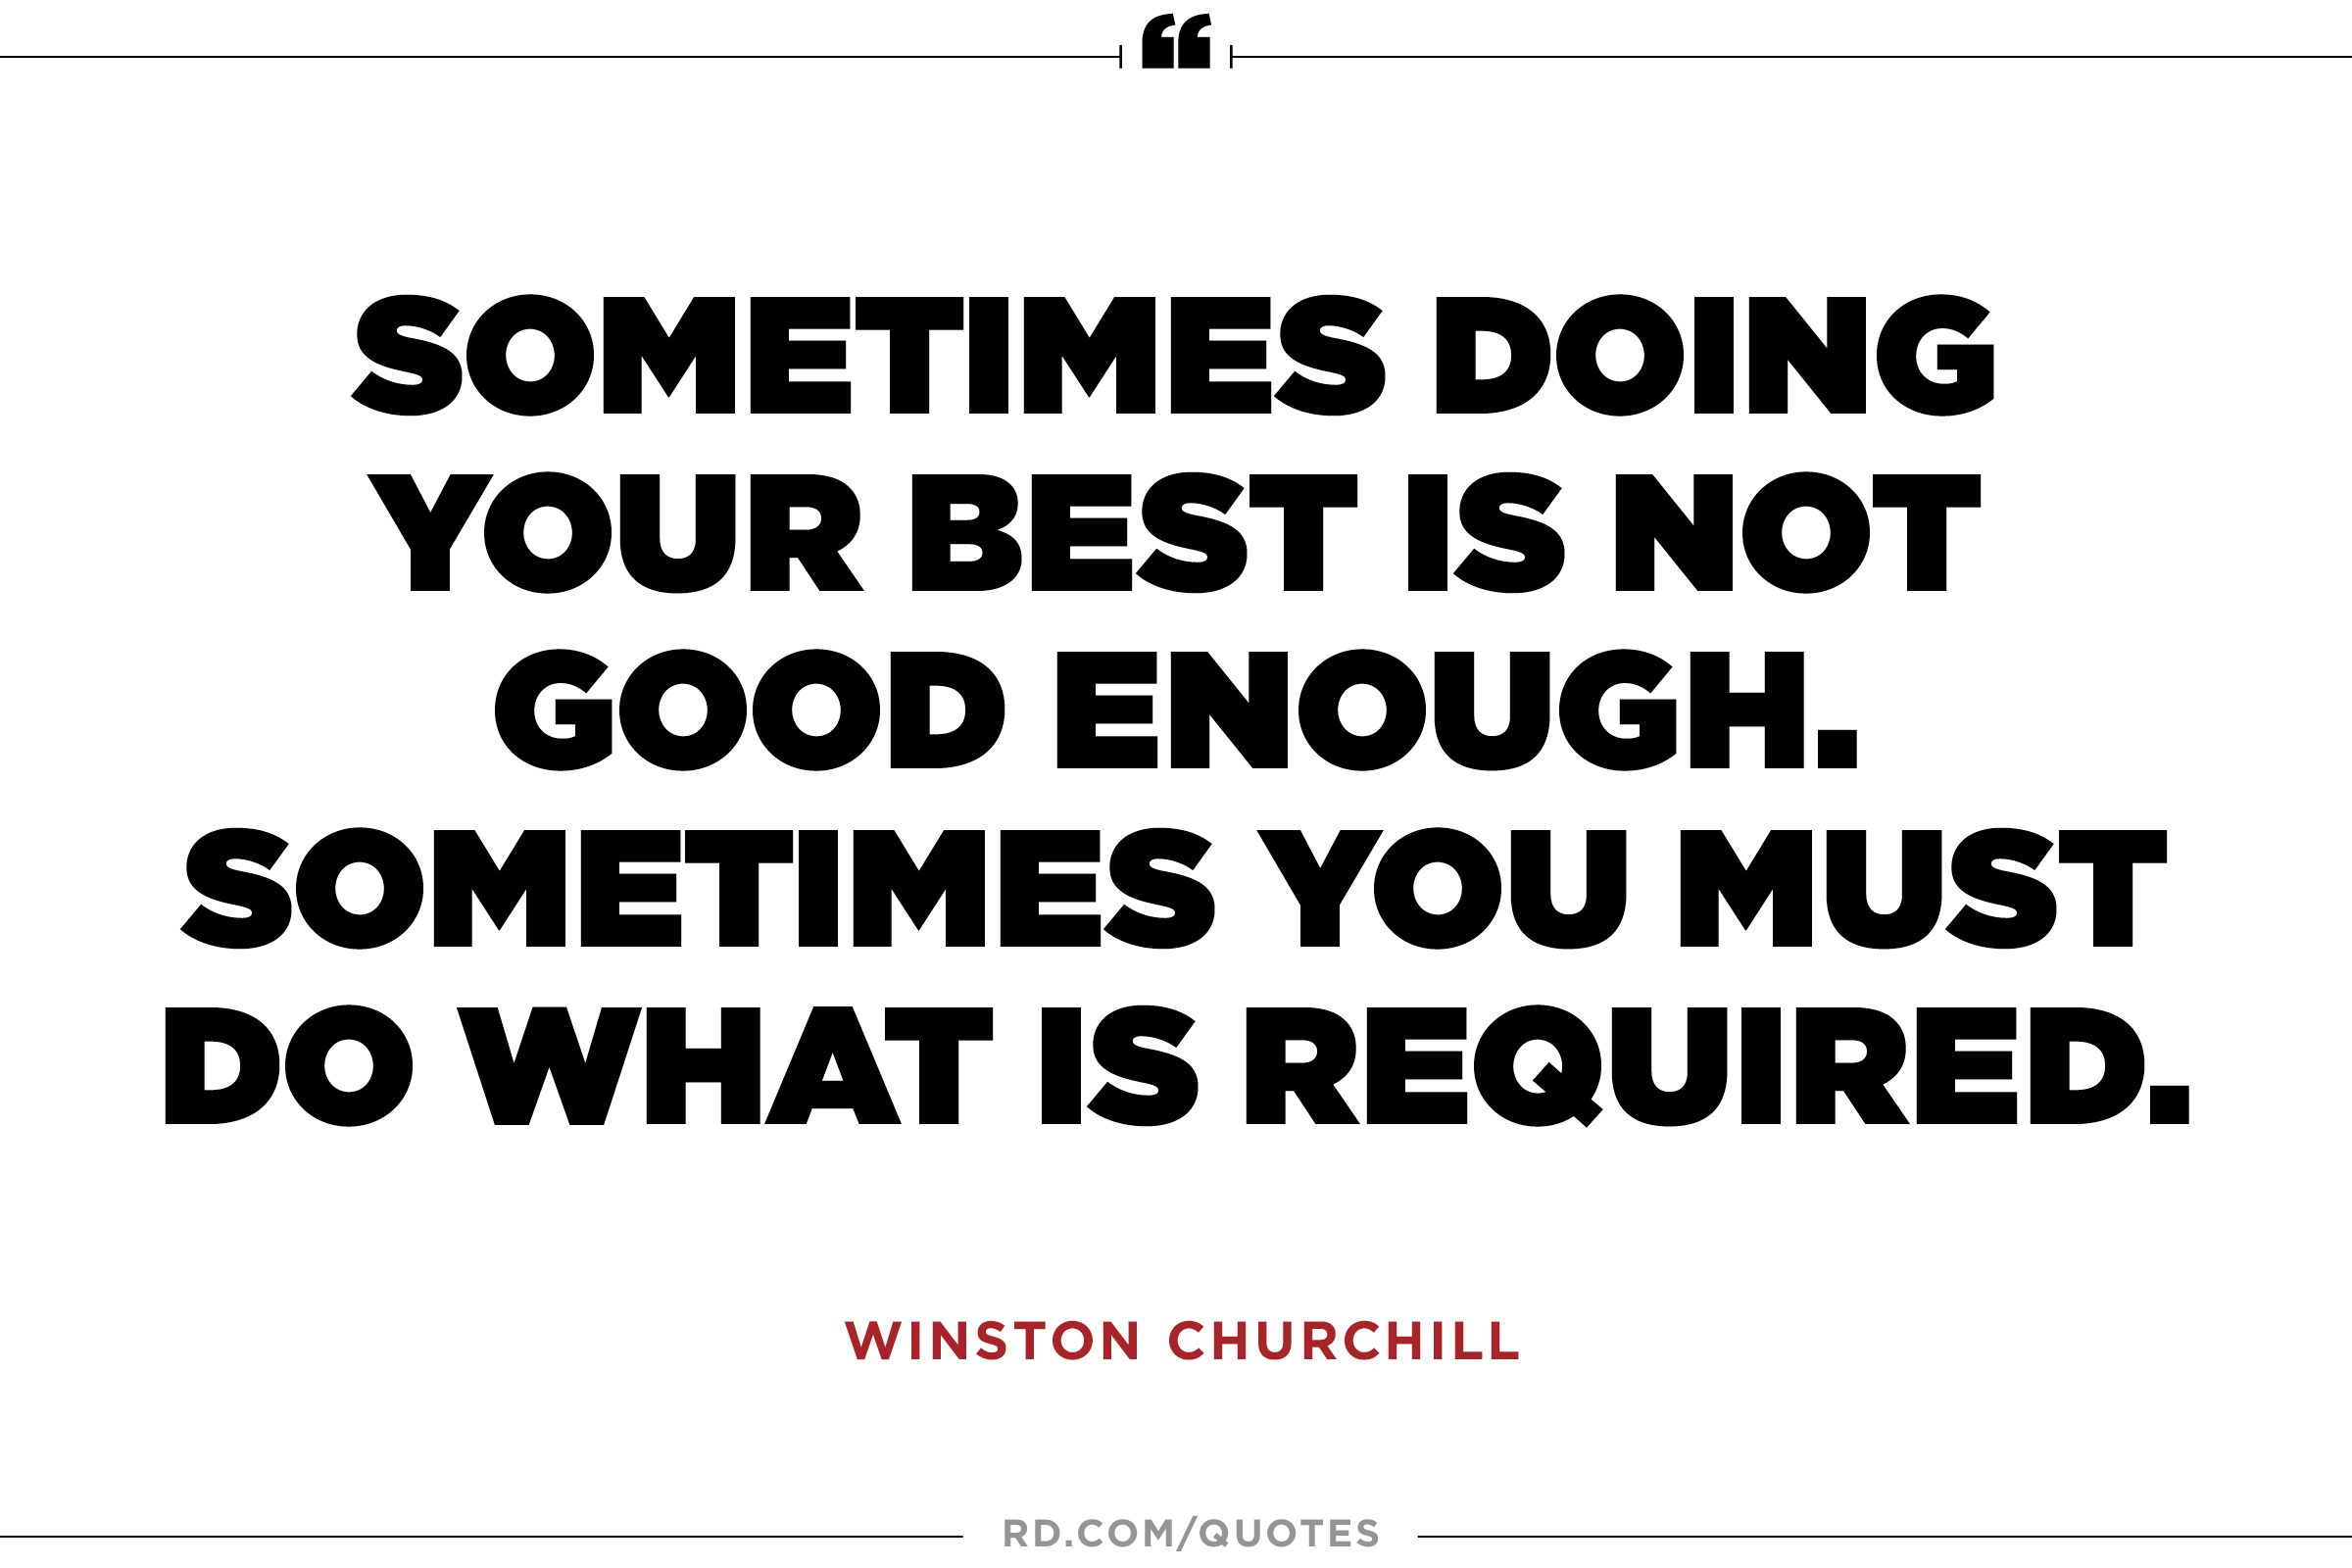 10 Winston Churchill Quotes That Get You to the Corner fice